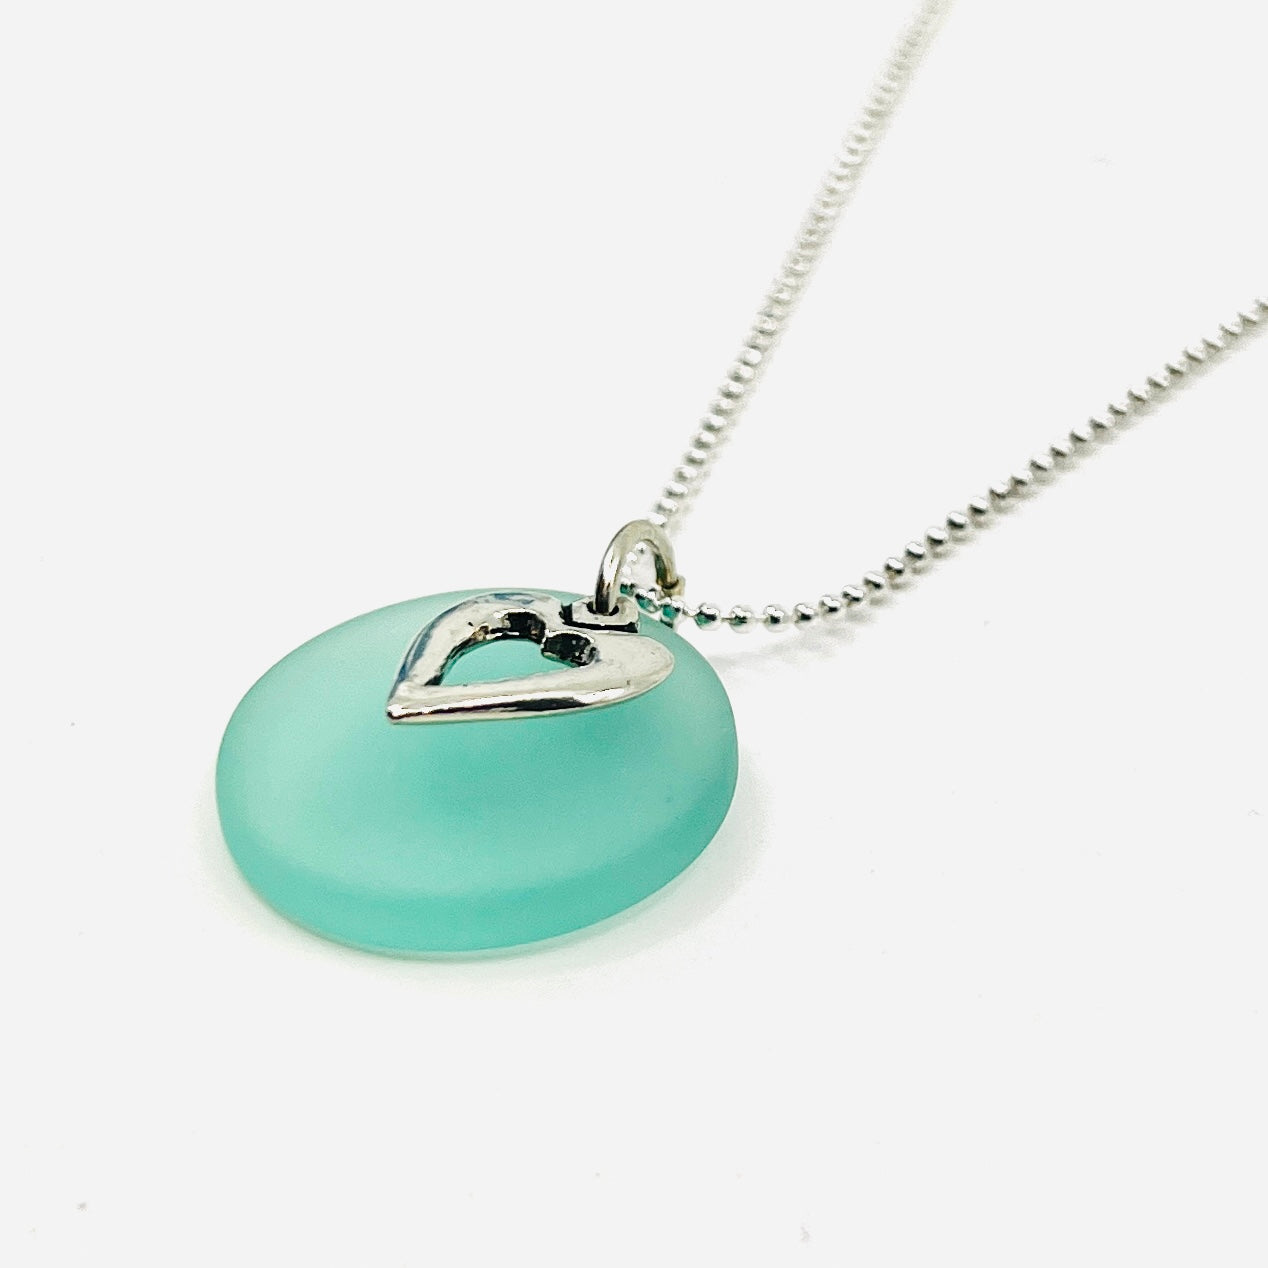 Pewter Heart Pendant Necklace with aqua Sea glass Jewelry Whitney Howard Designs 